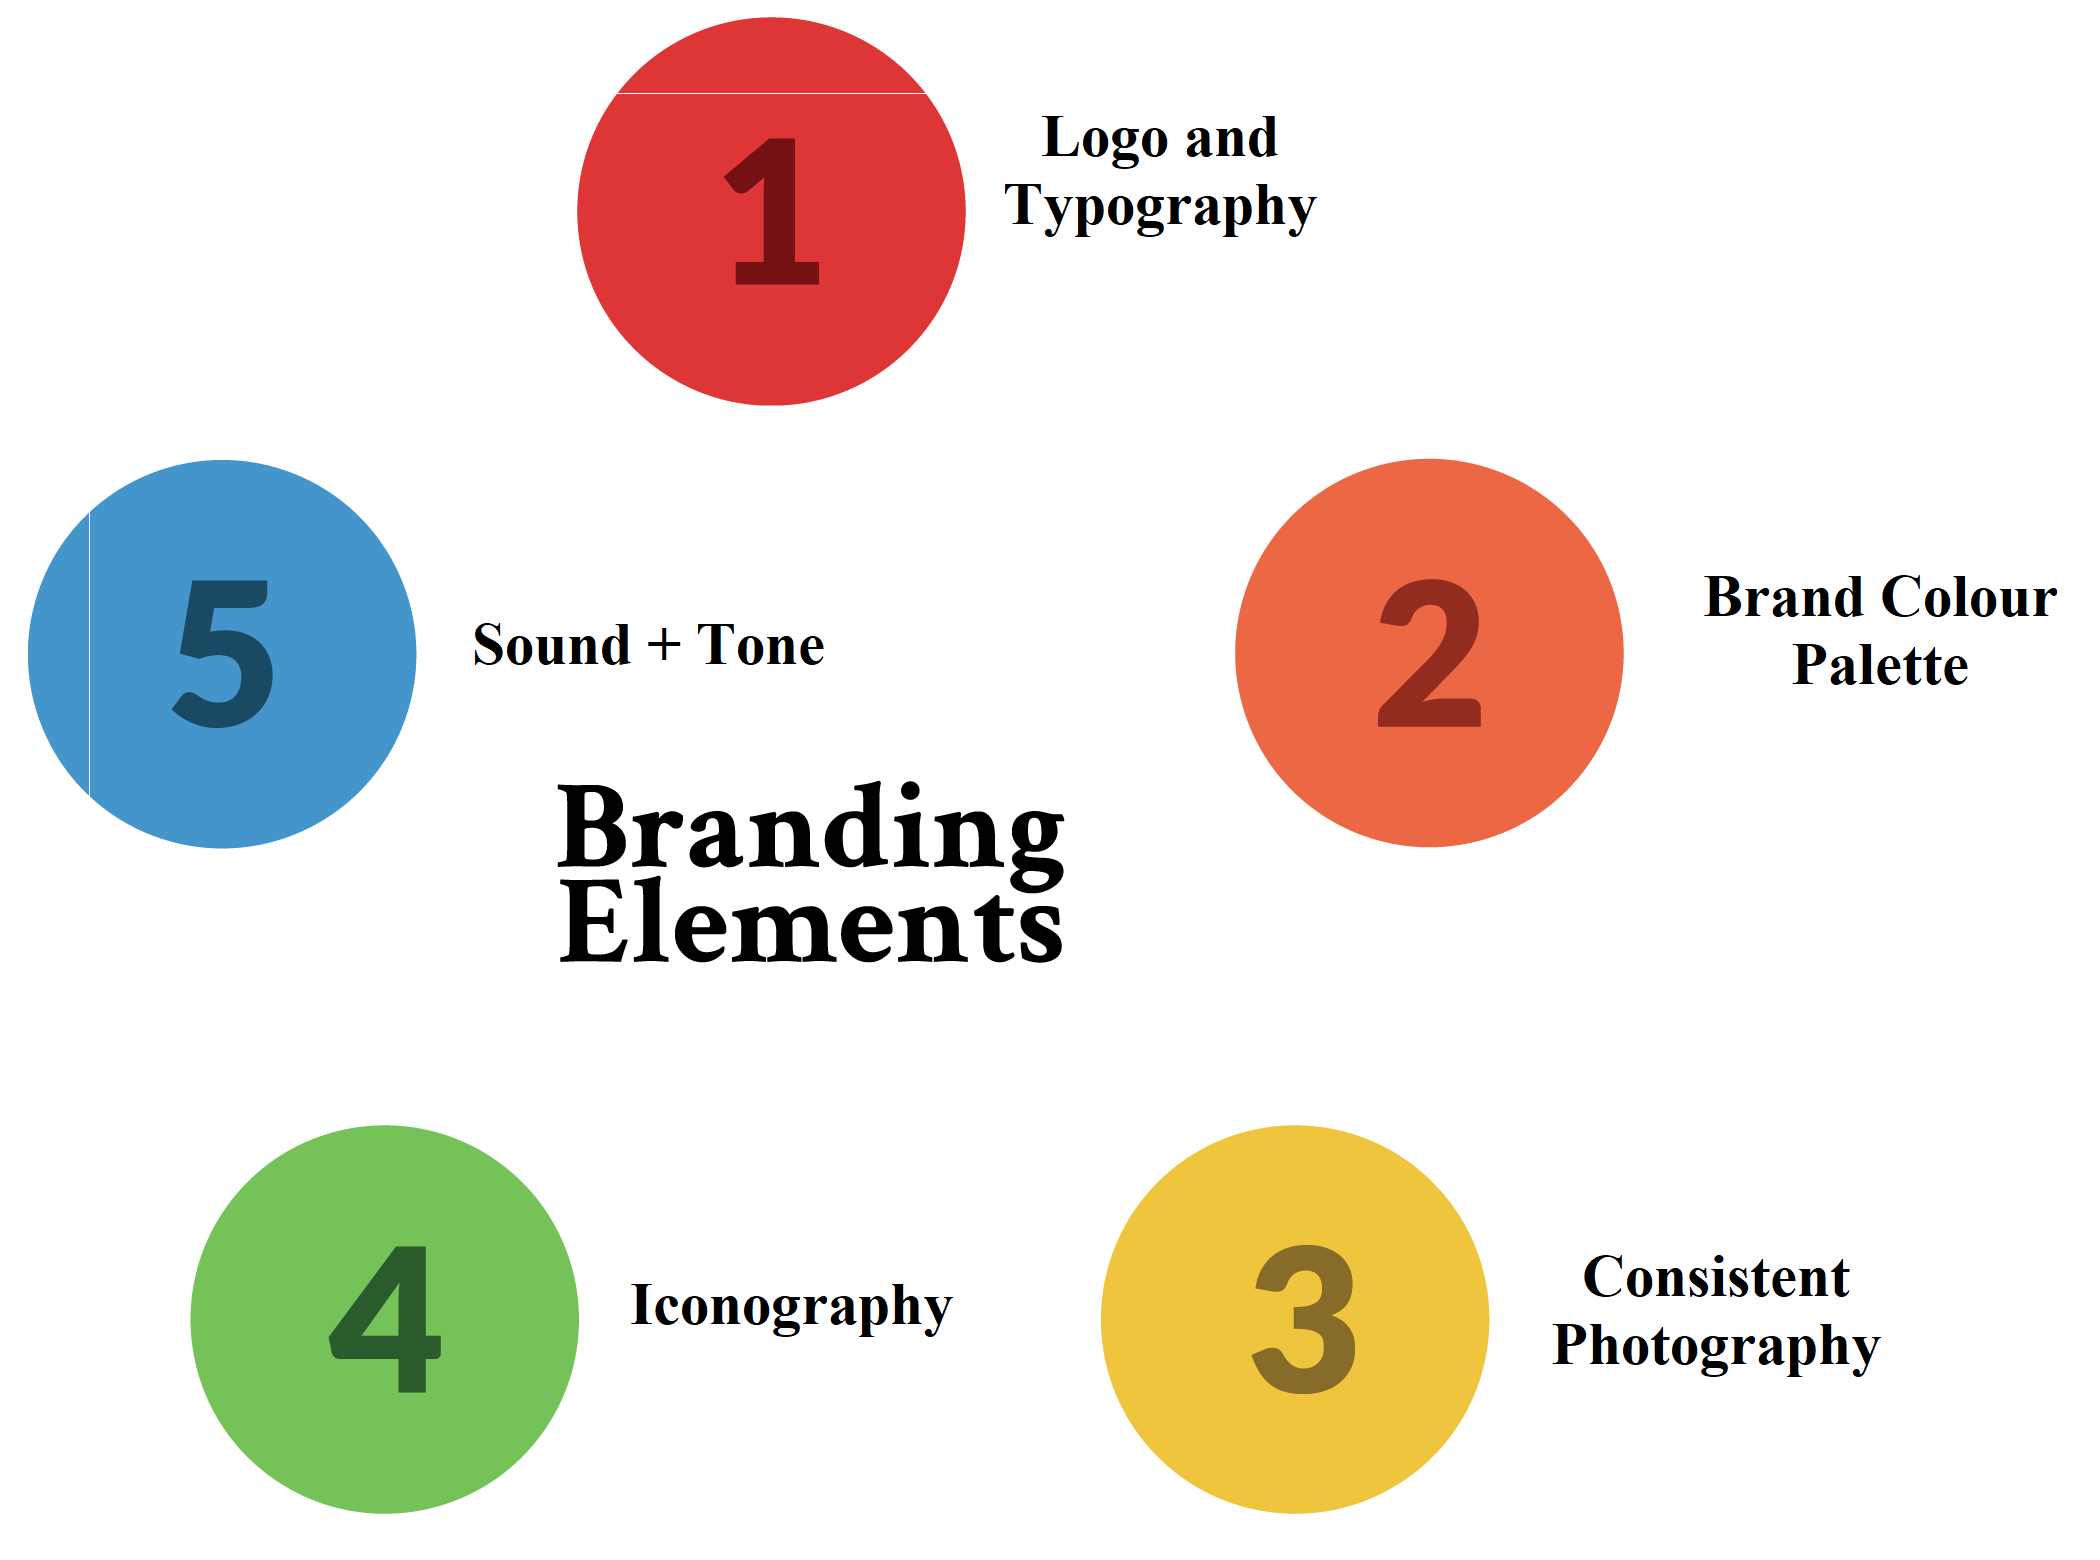 Five branding elements include: logo and typography, brand colour palette, consistent photography, iconography, and sound + tone.